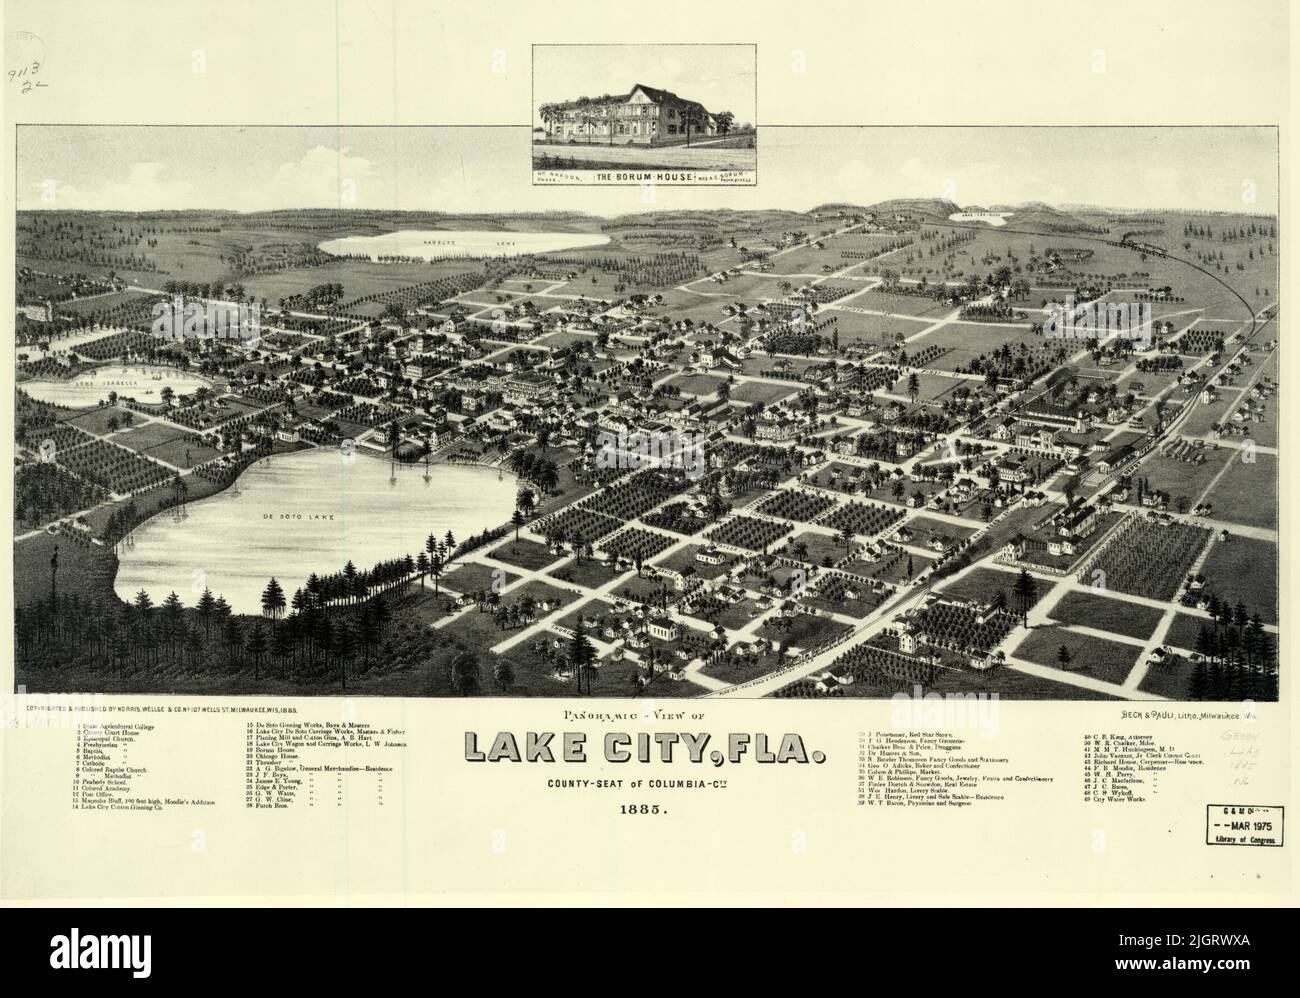 Bird's Eye Panoramic View of Lake City, Florida, Seat of Columbia County, 1885, by Norris, Wellge and Company Stock Photo